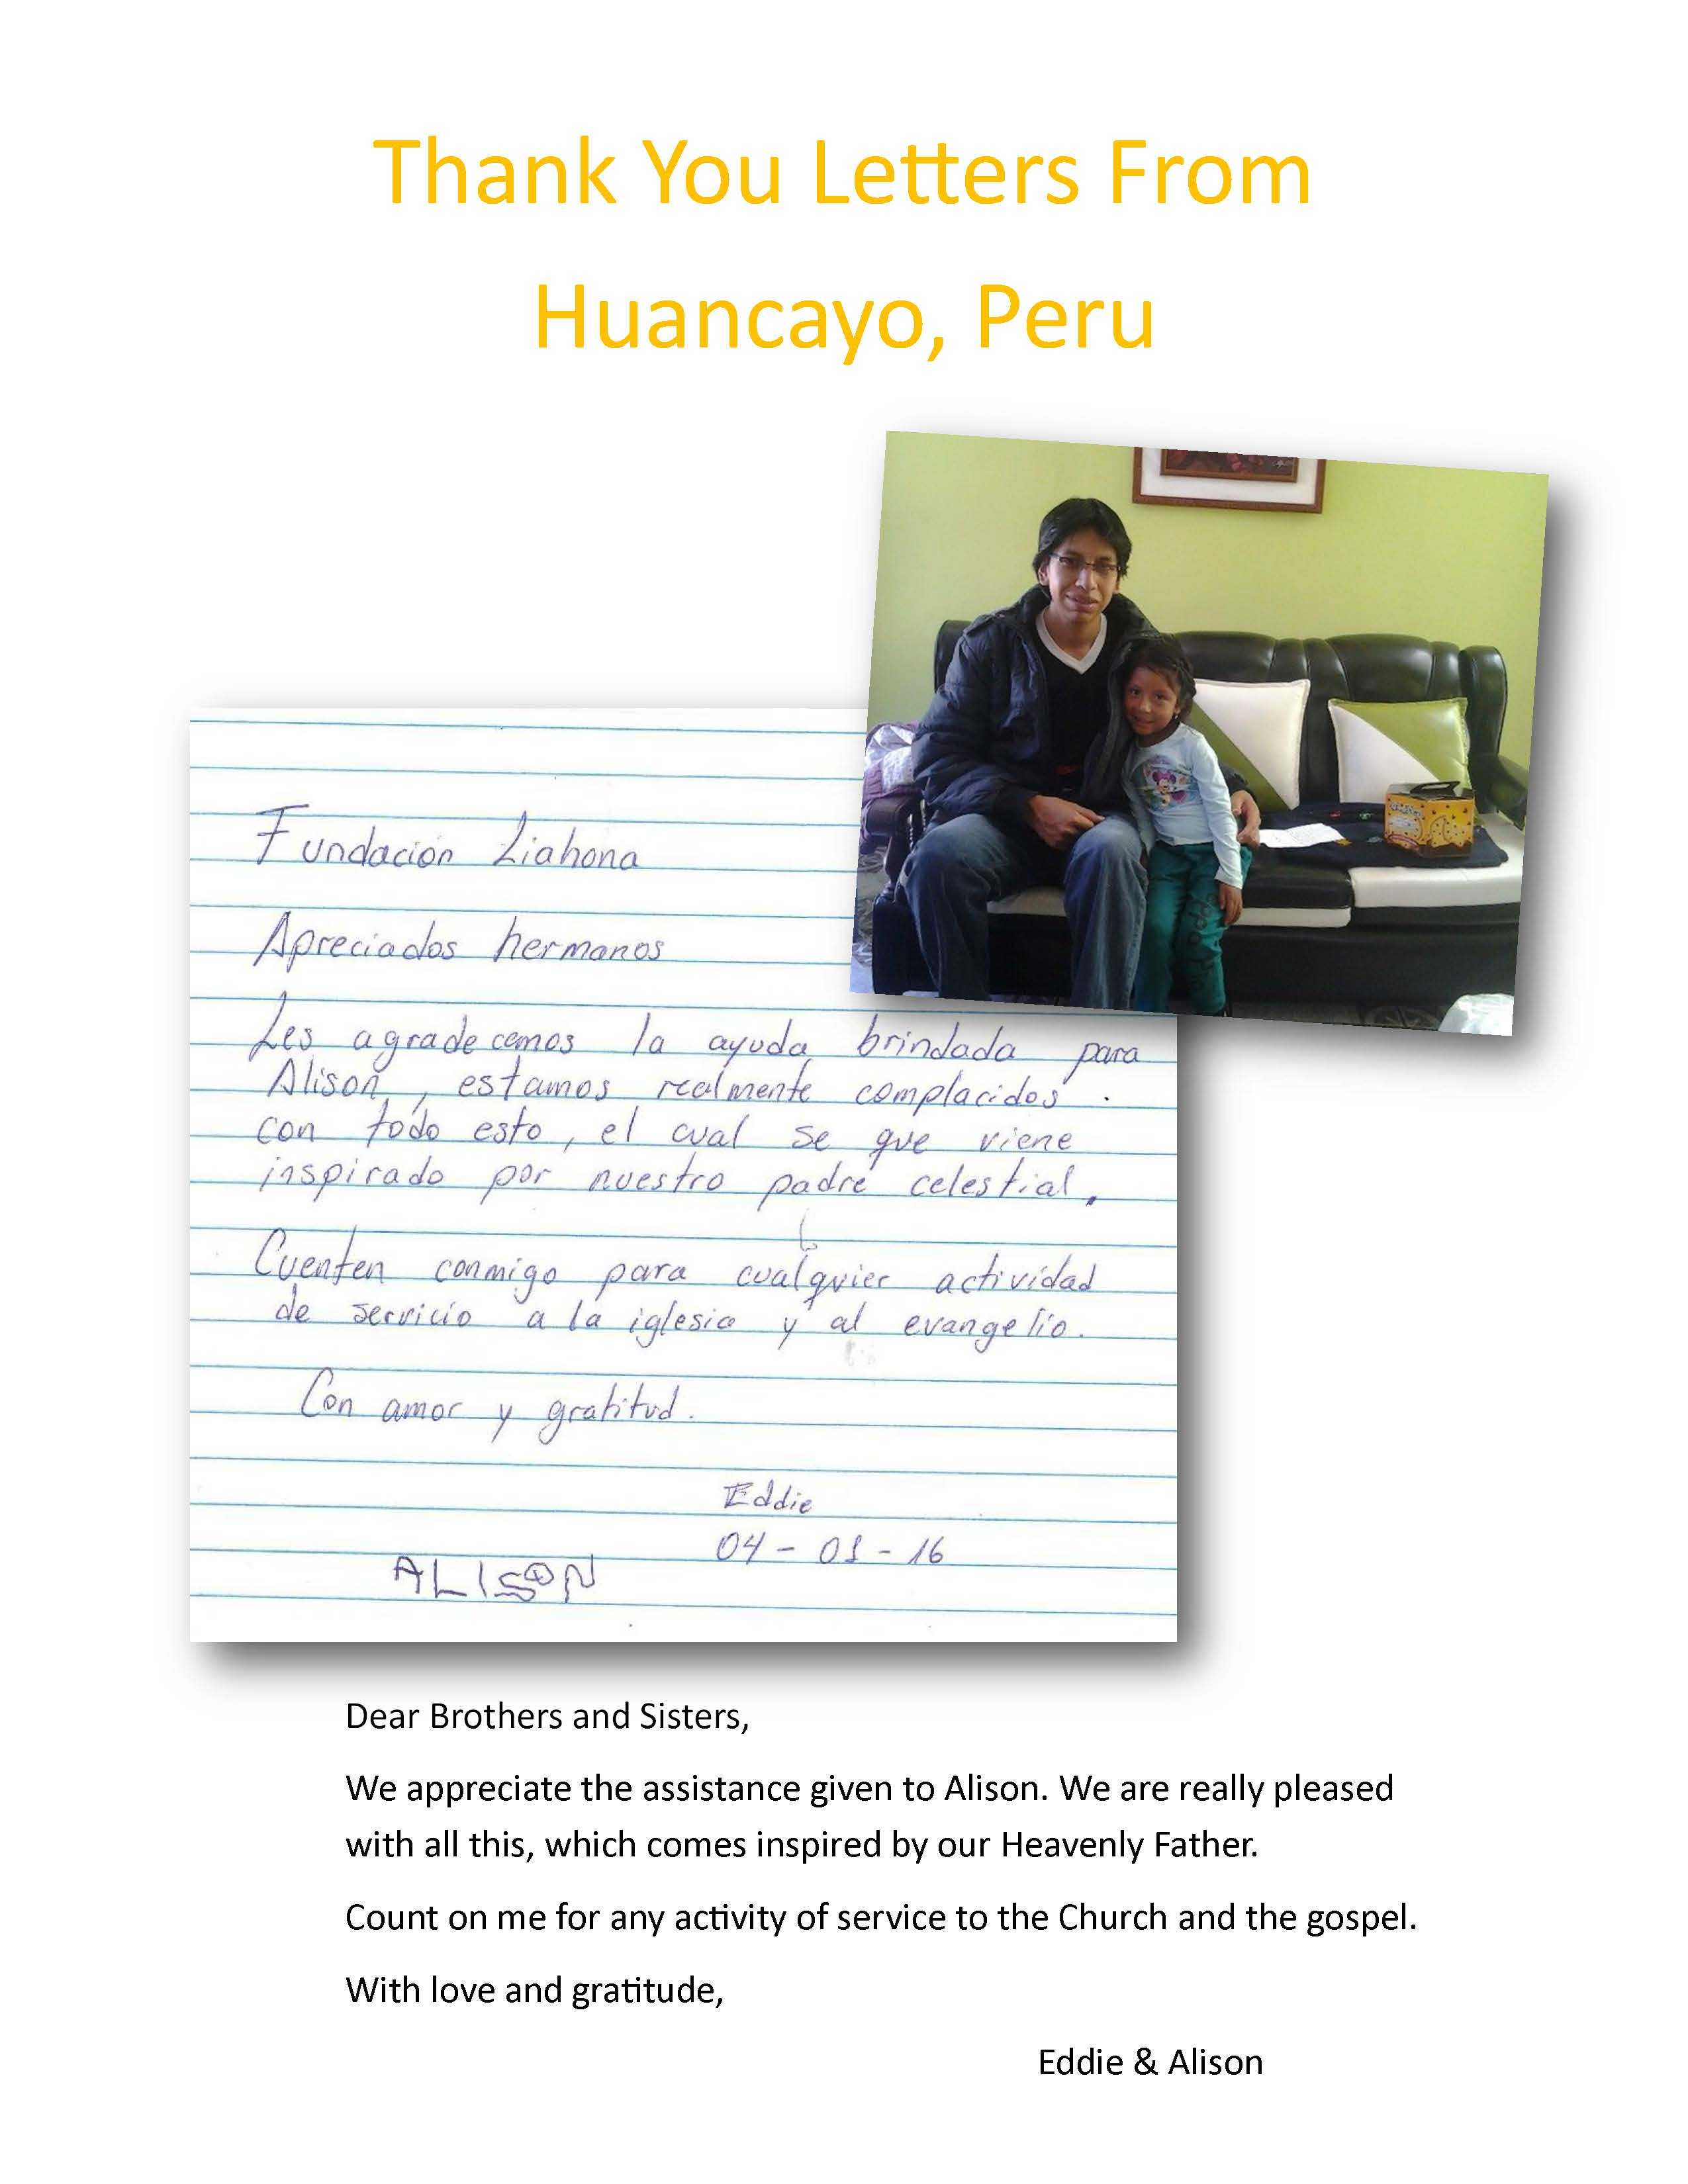 Huancayo-Thank-You-Letters-7-7-2016_Page_1